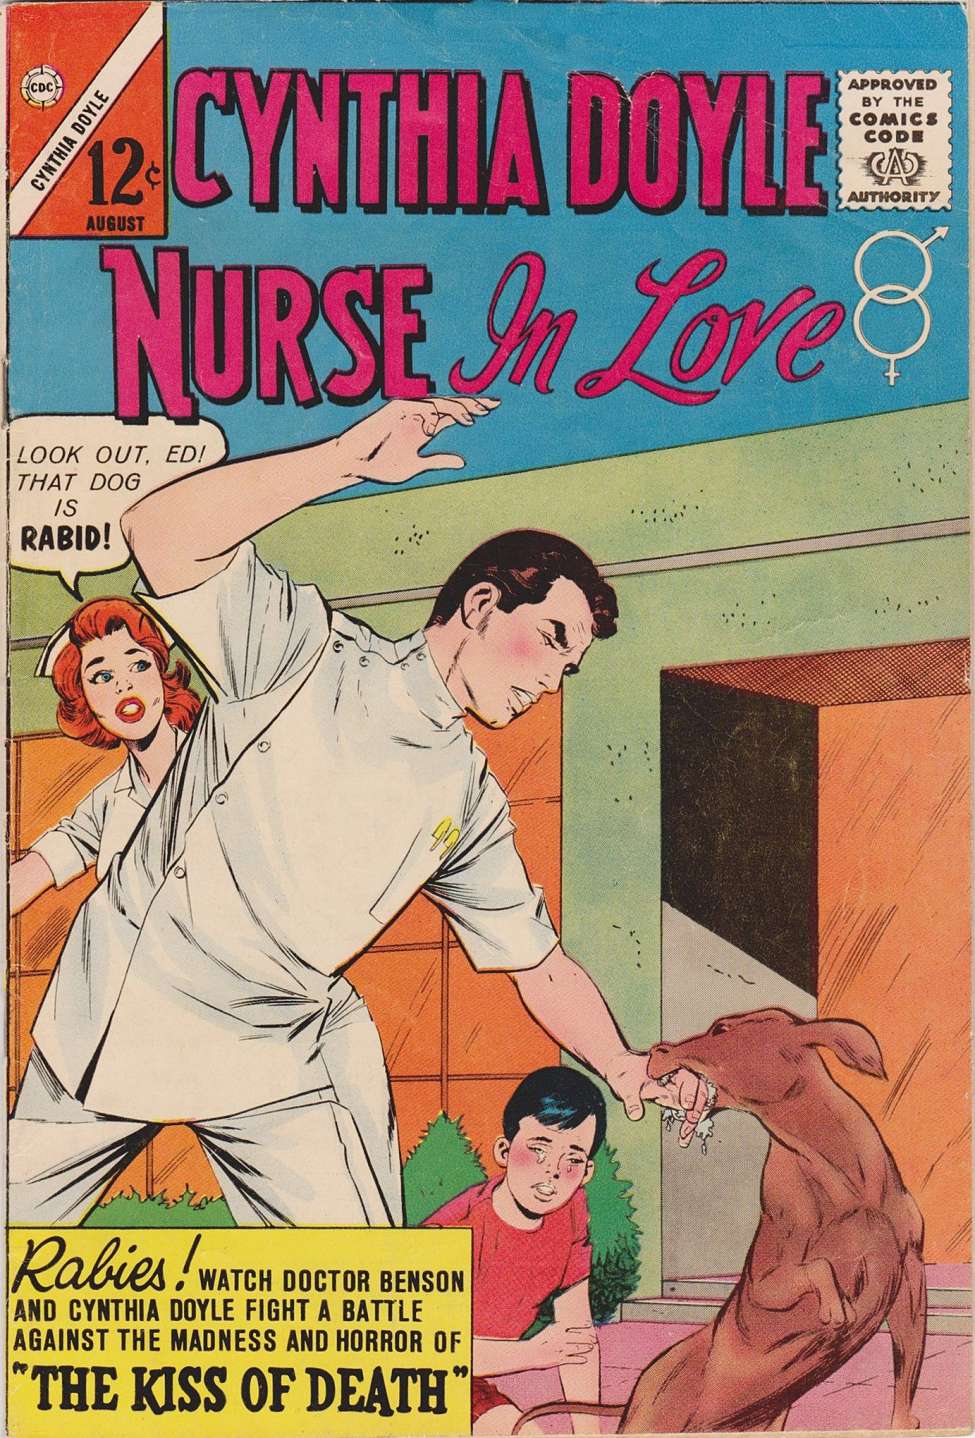 Book Cover For Cynthia Doyle, Nurse In Love 71